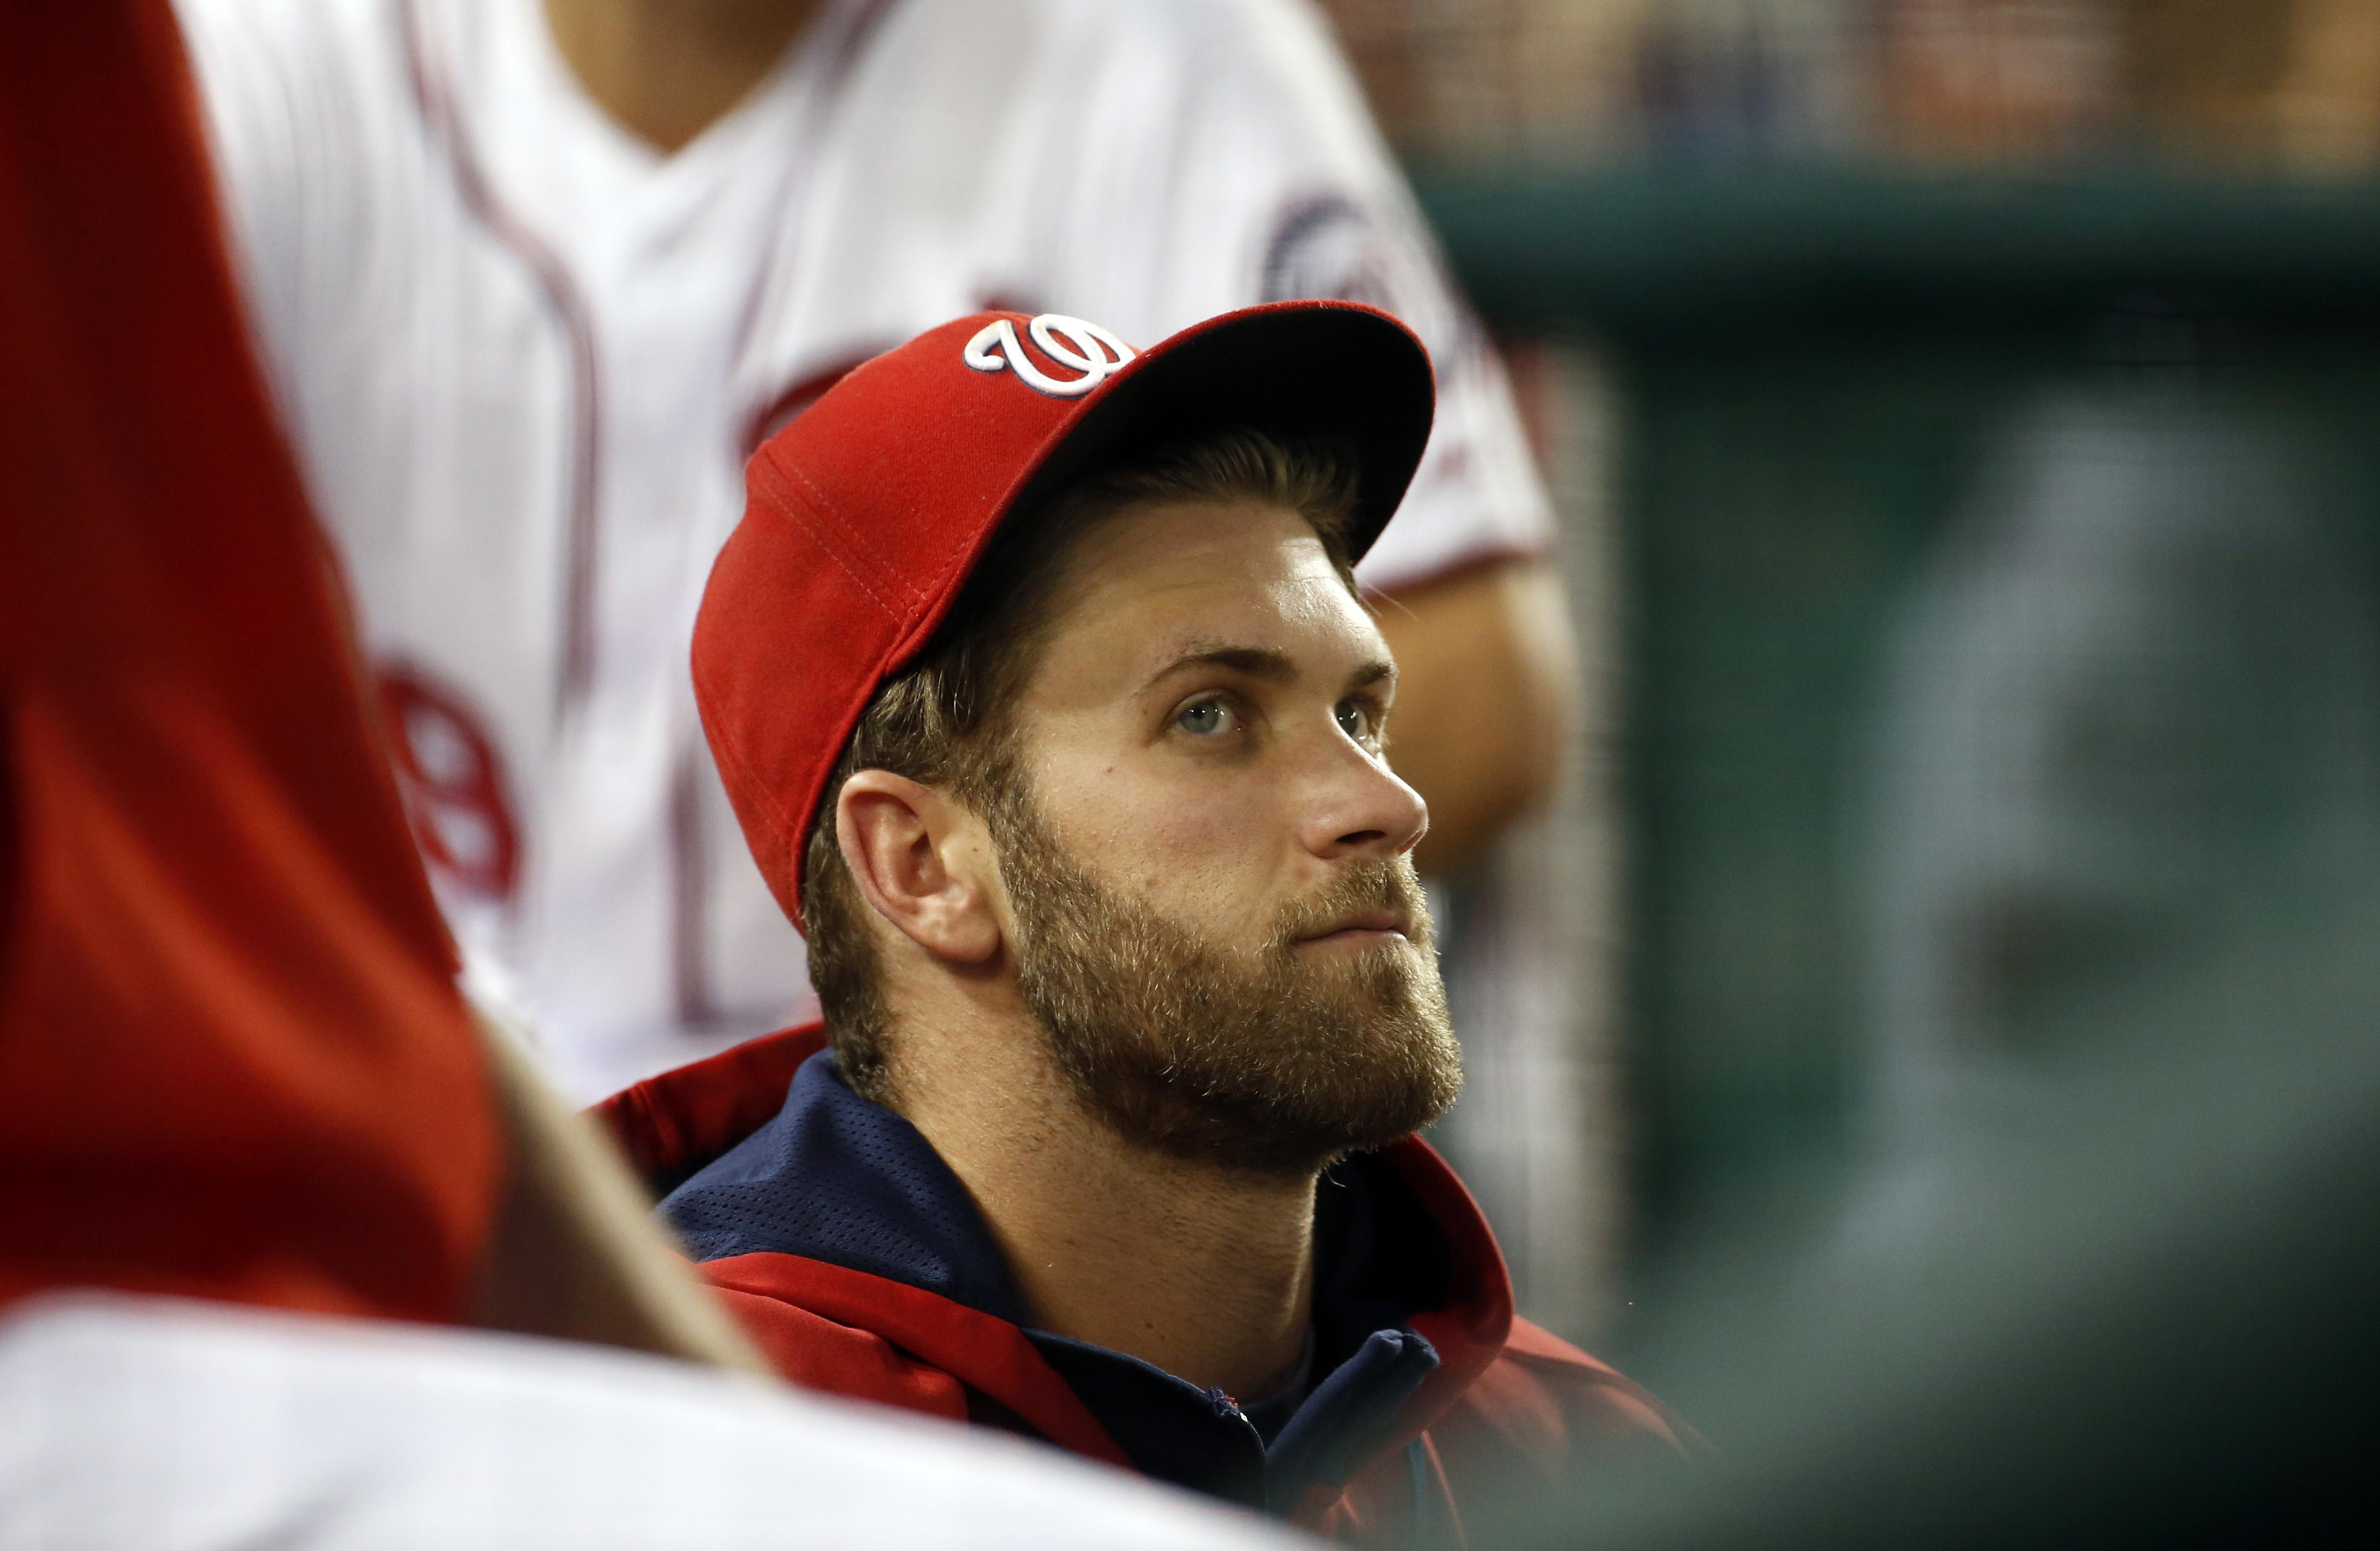 Bryce Harper, Kevin Love among athletes in ESPN Body Issue